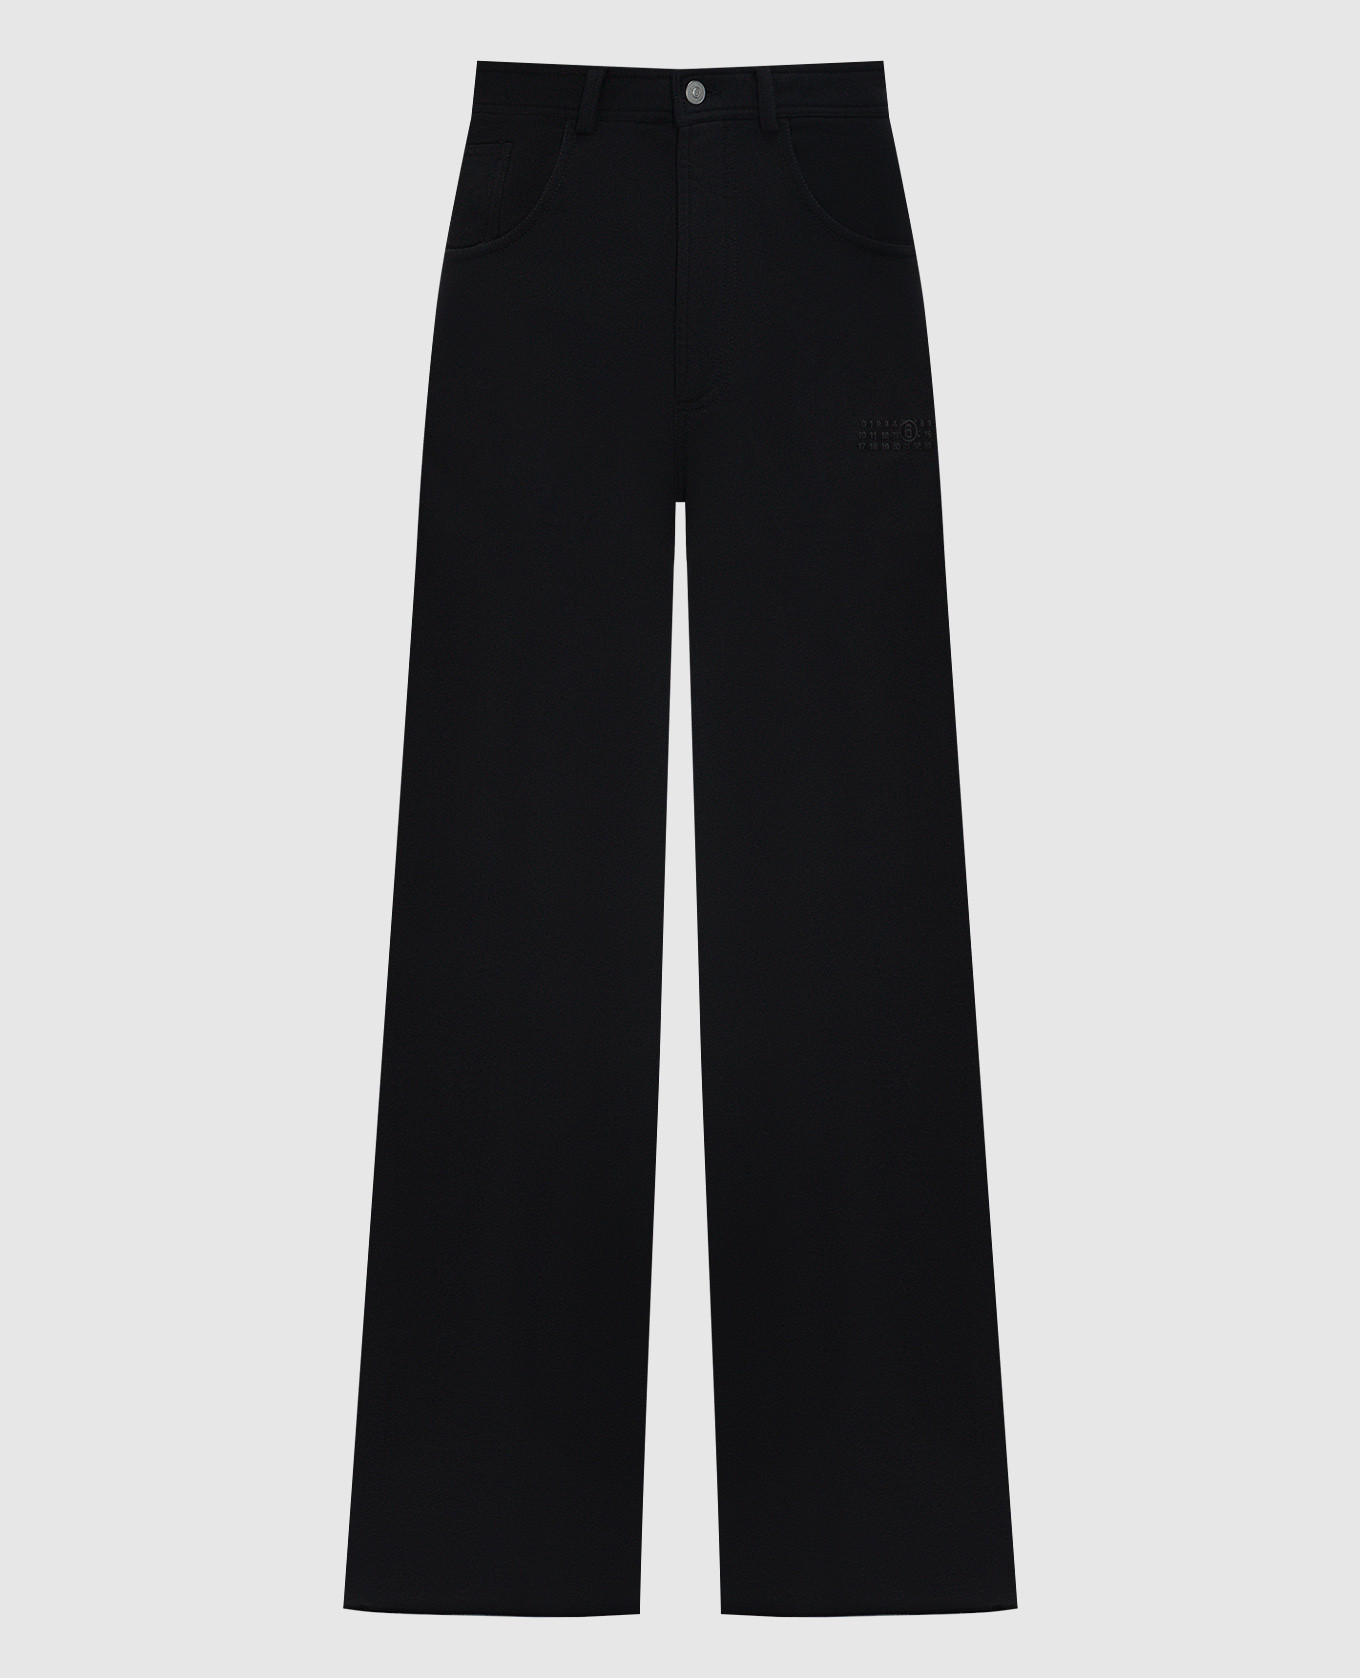 Black straight trousers with logo